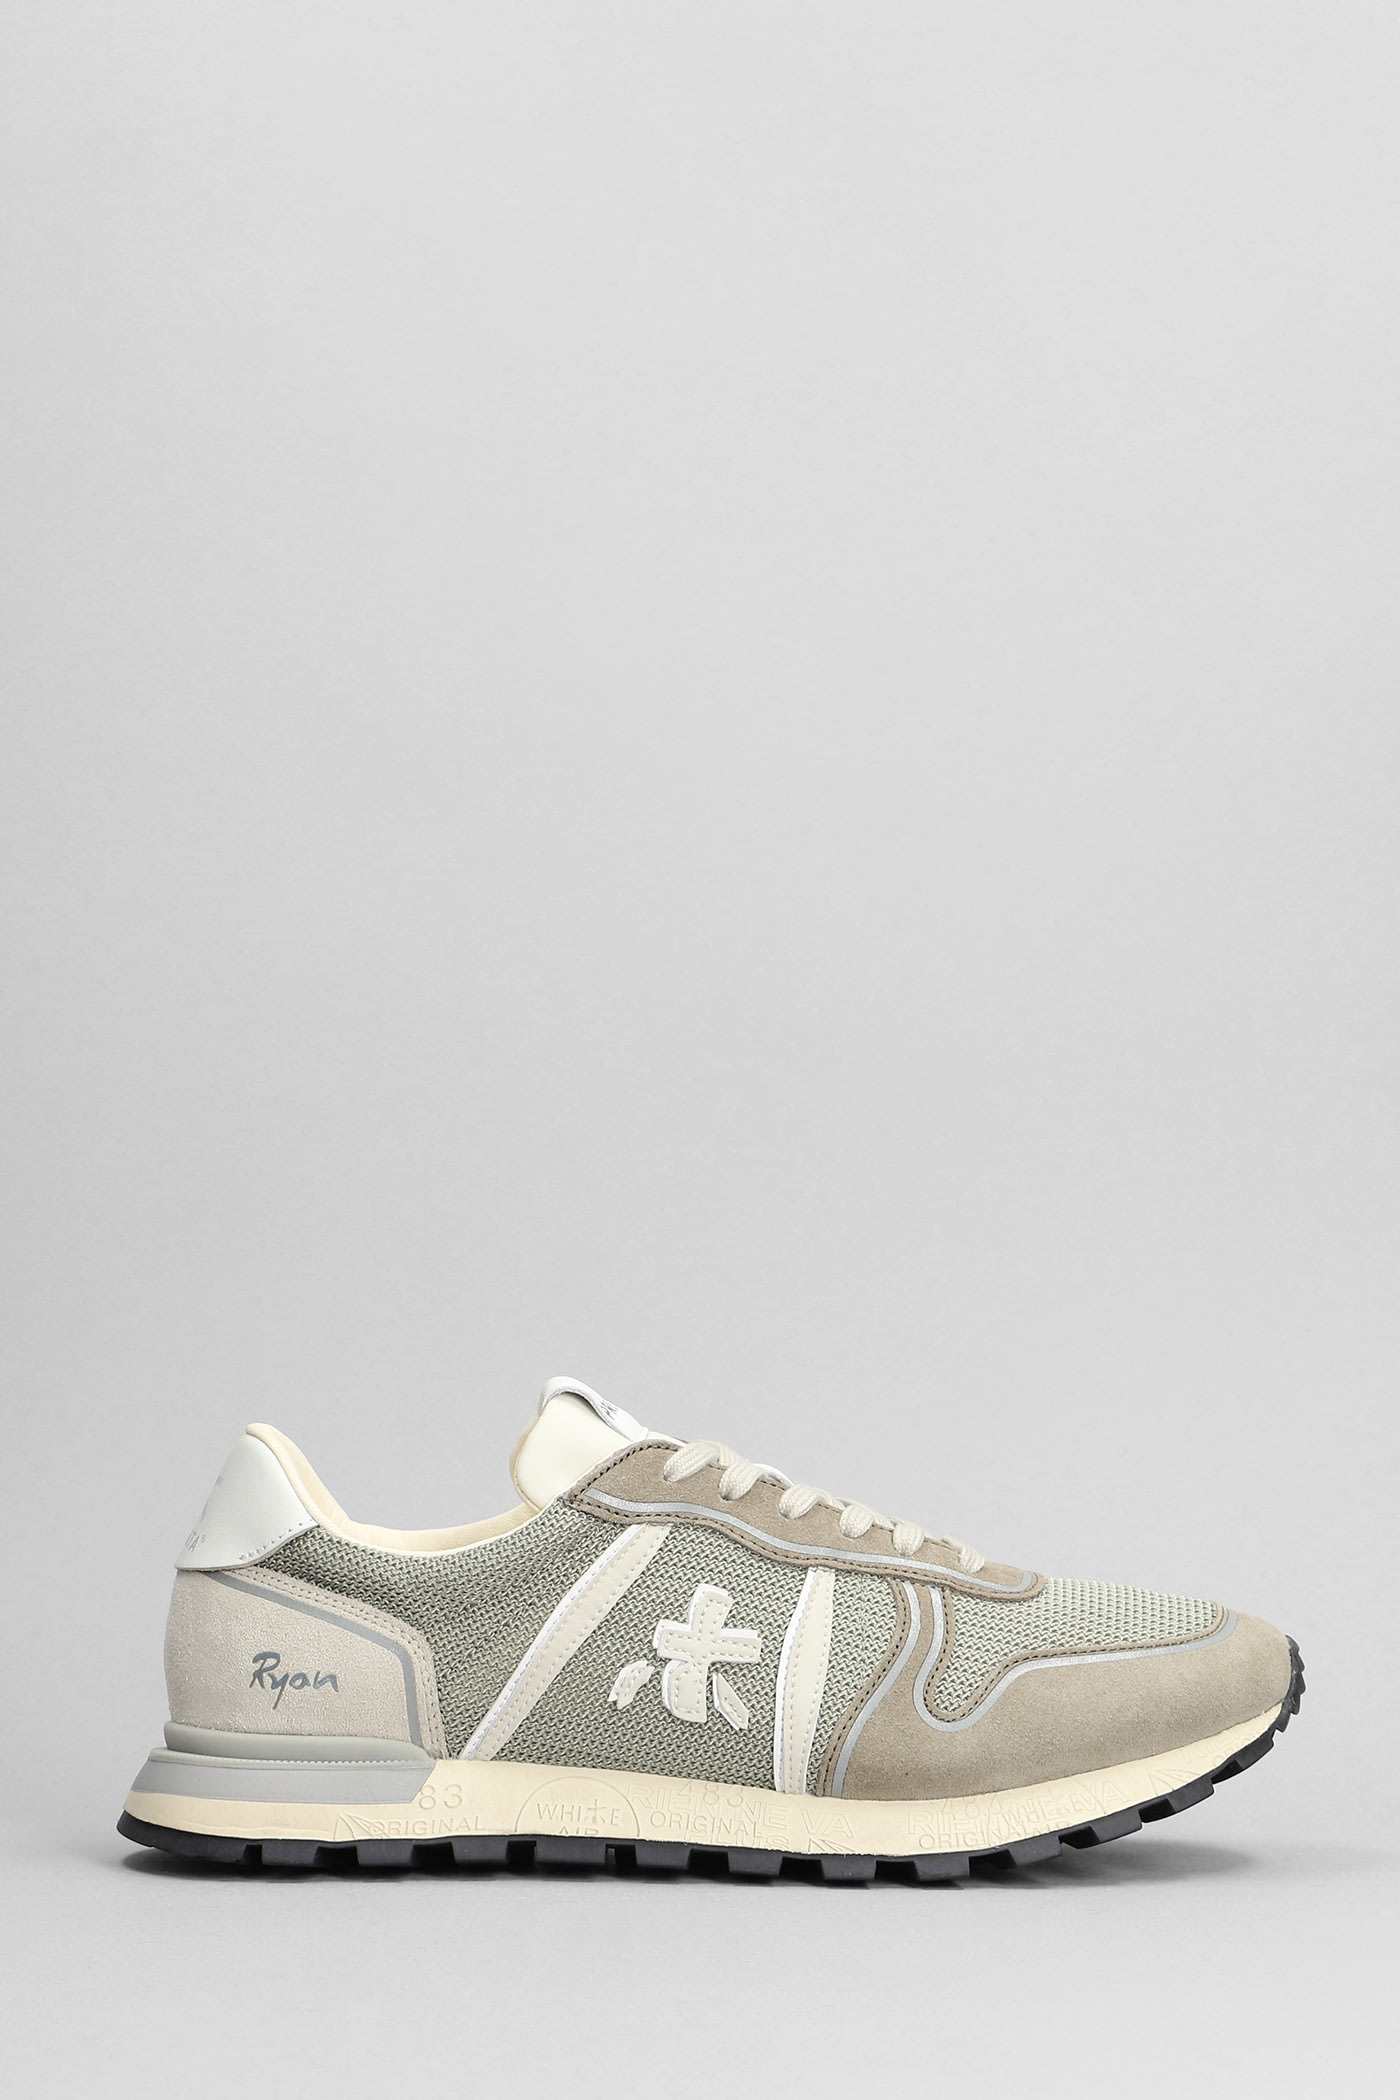 Premiata Ryan Sneakers In Taupe Suede And Fabric